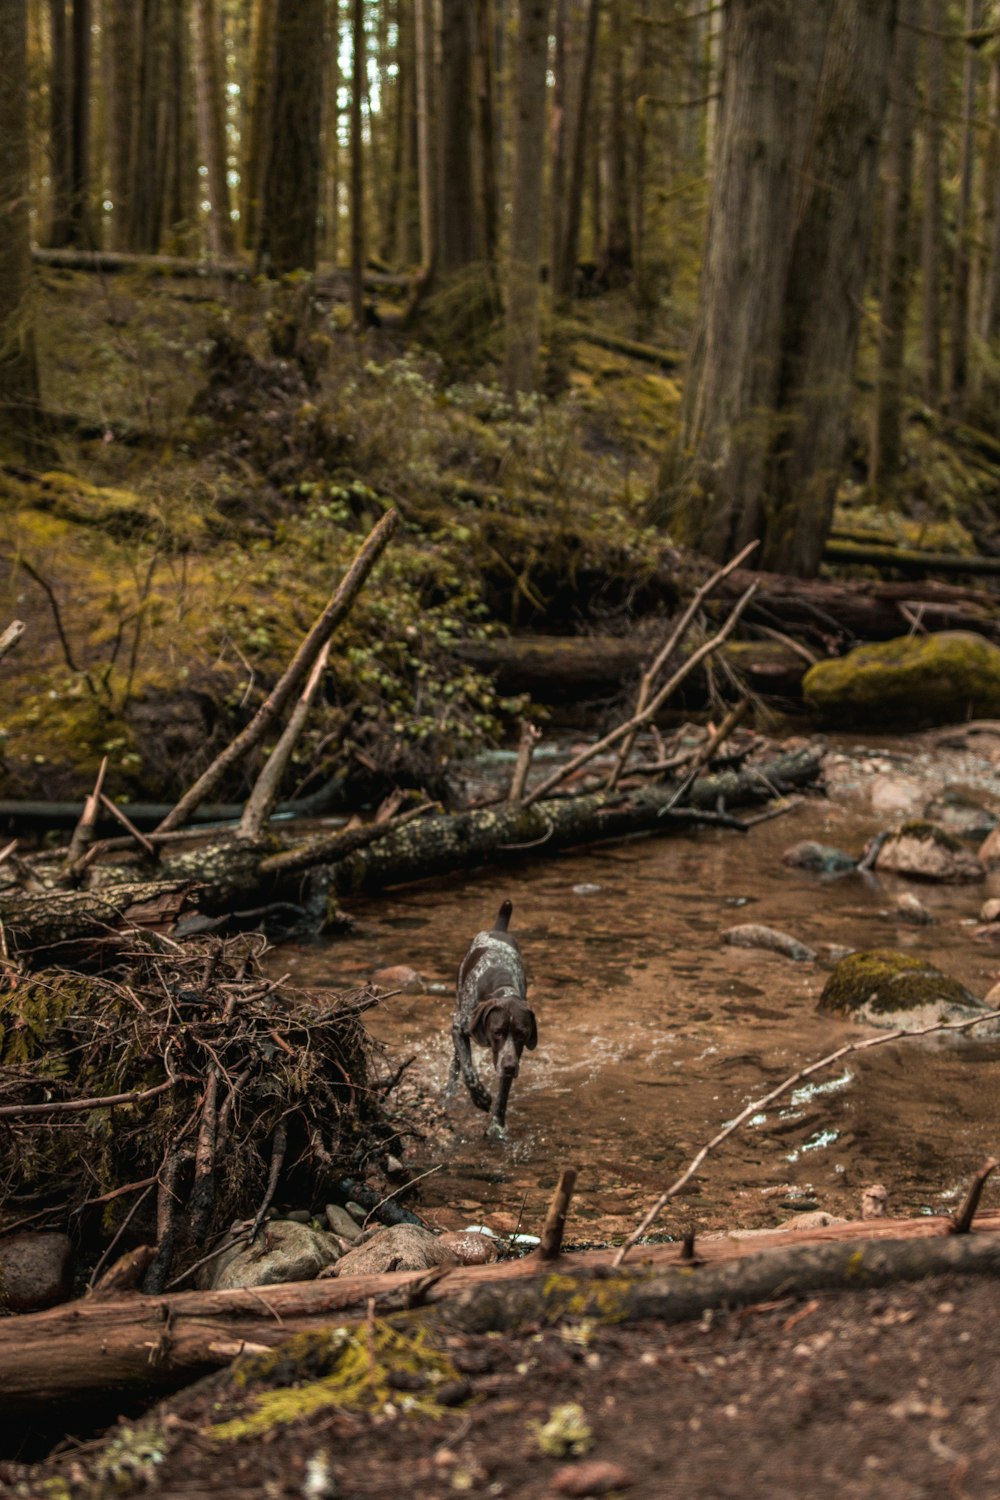 a bird standing in a stream in a forest